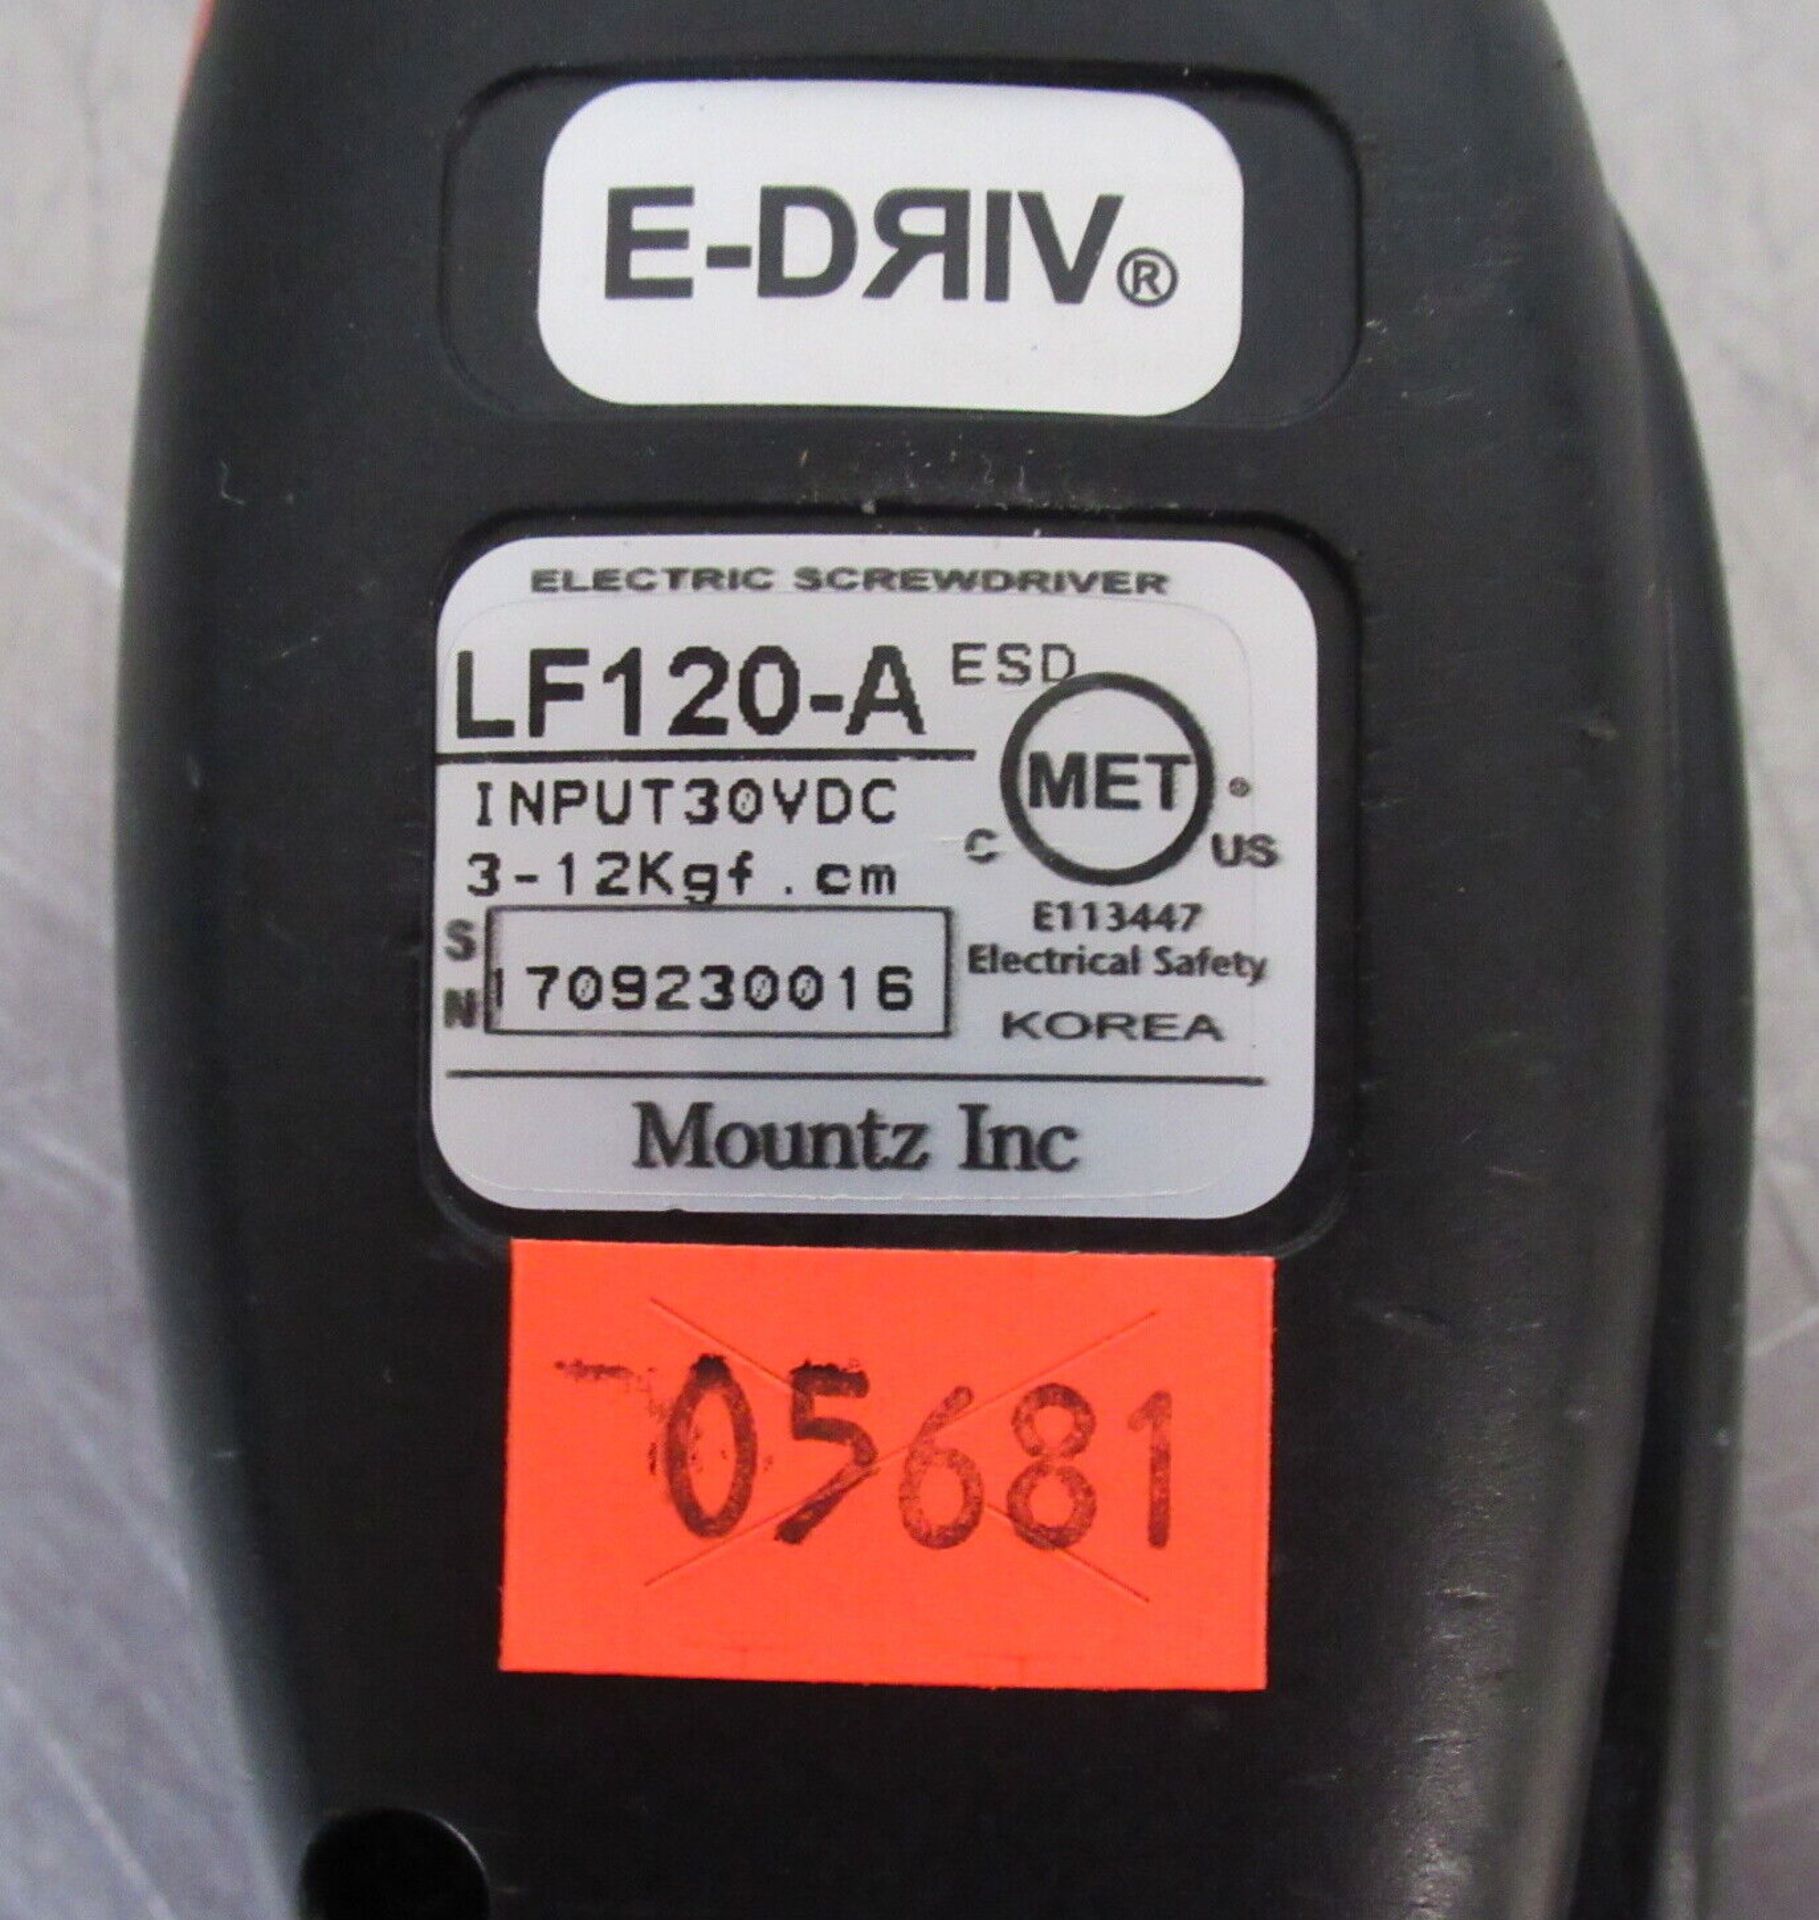 Mountz LF120-A ESD Electric Screwdriver w/ STC-40 Controller - Image 6 of 7